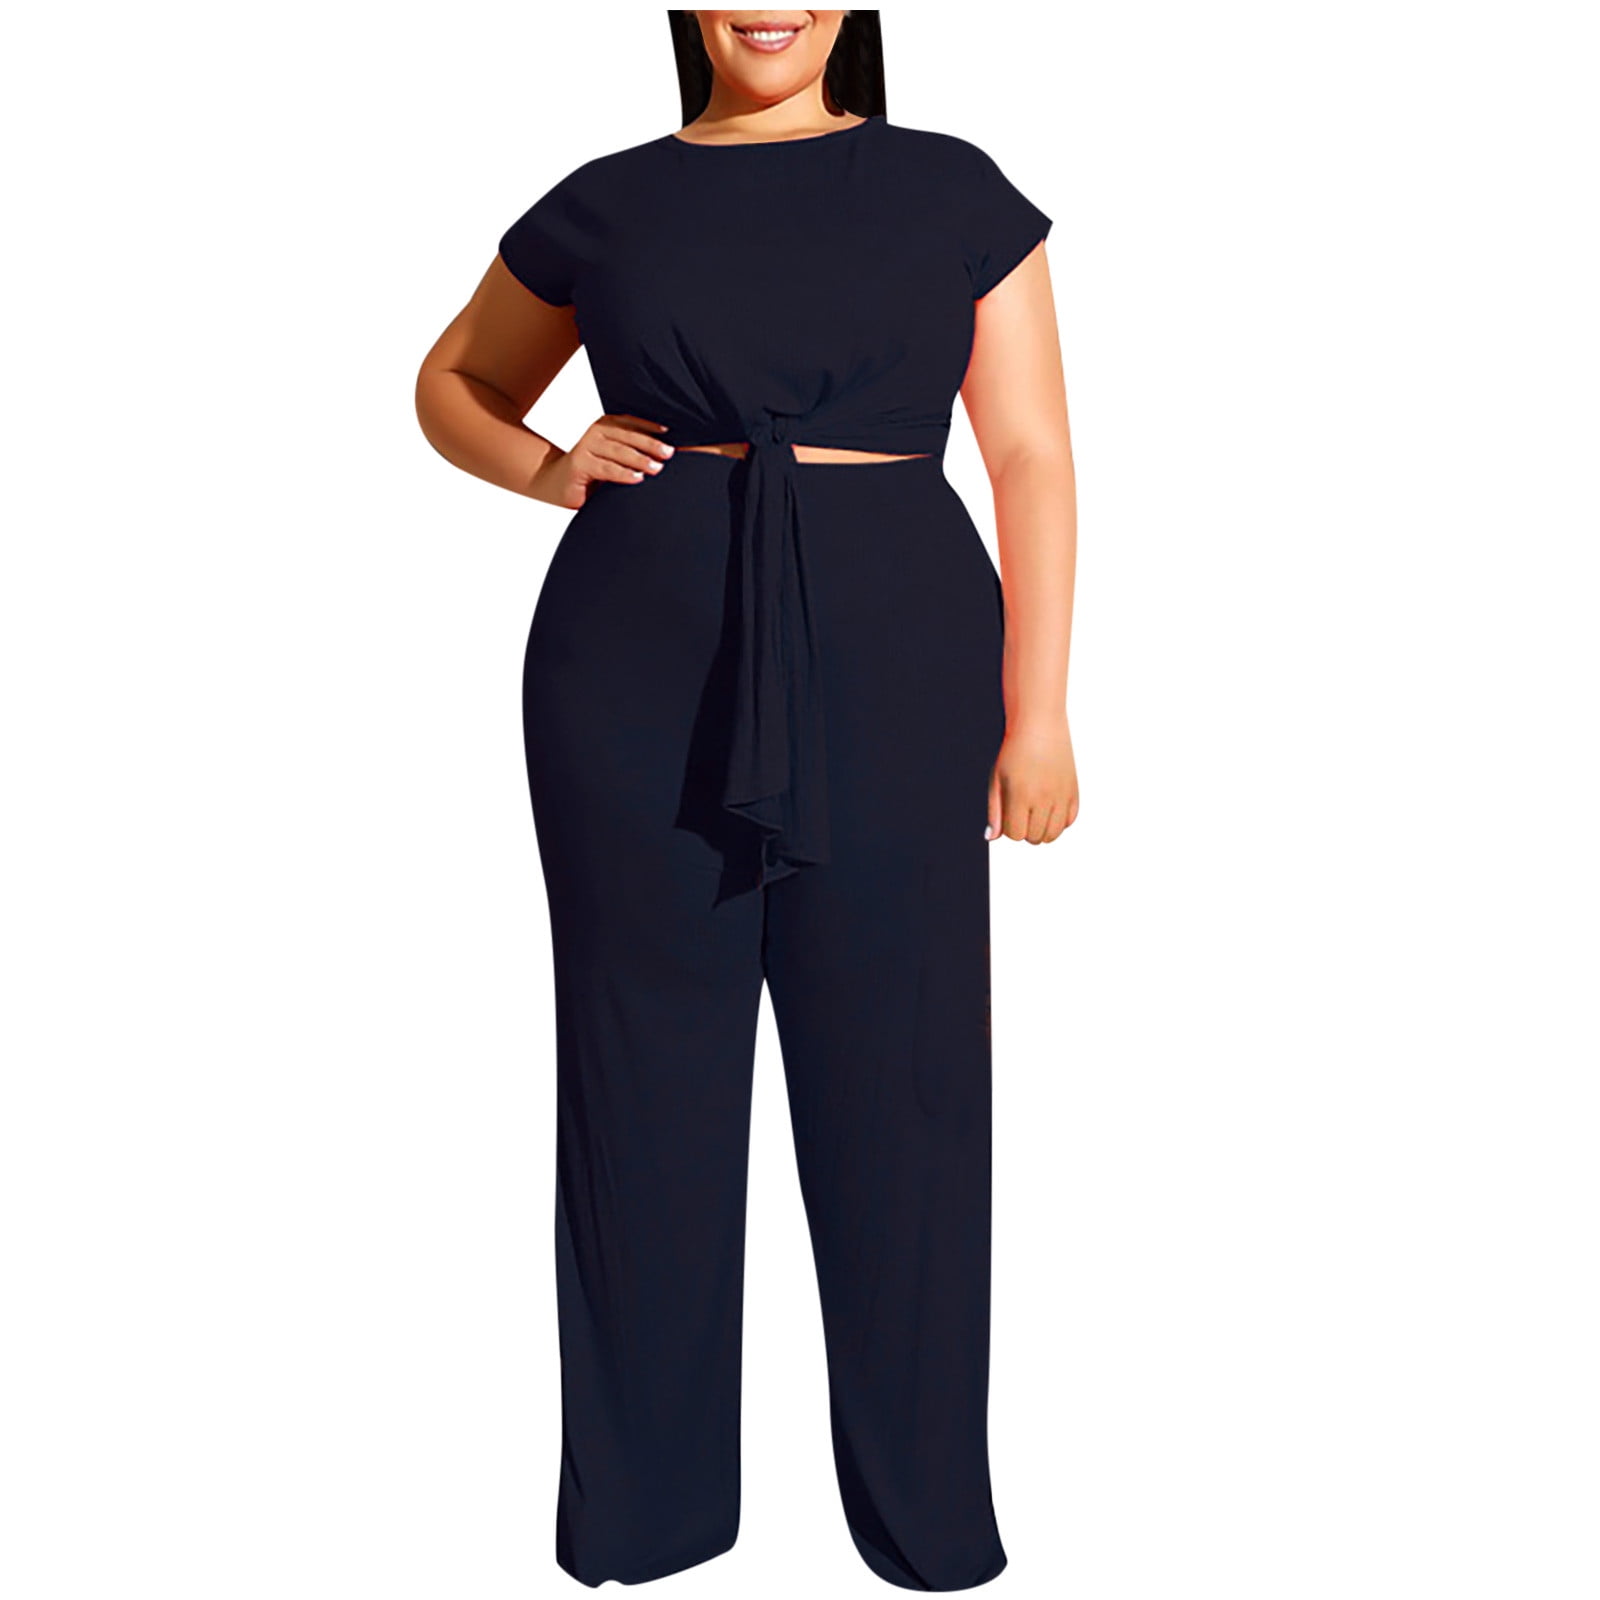 YWDJ Two Piece Outfits for Women Dressy Women Plus Size Solid Short Sleeve  O Neck Bandage Pullover Leisure Tops + Long Pants Set Navy XL 